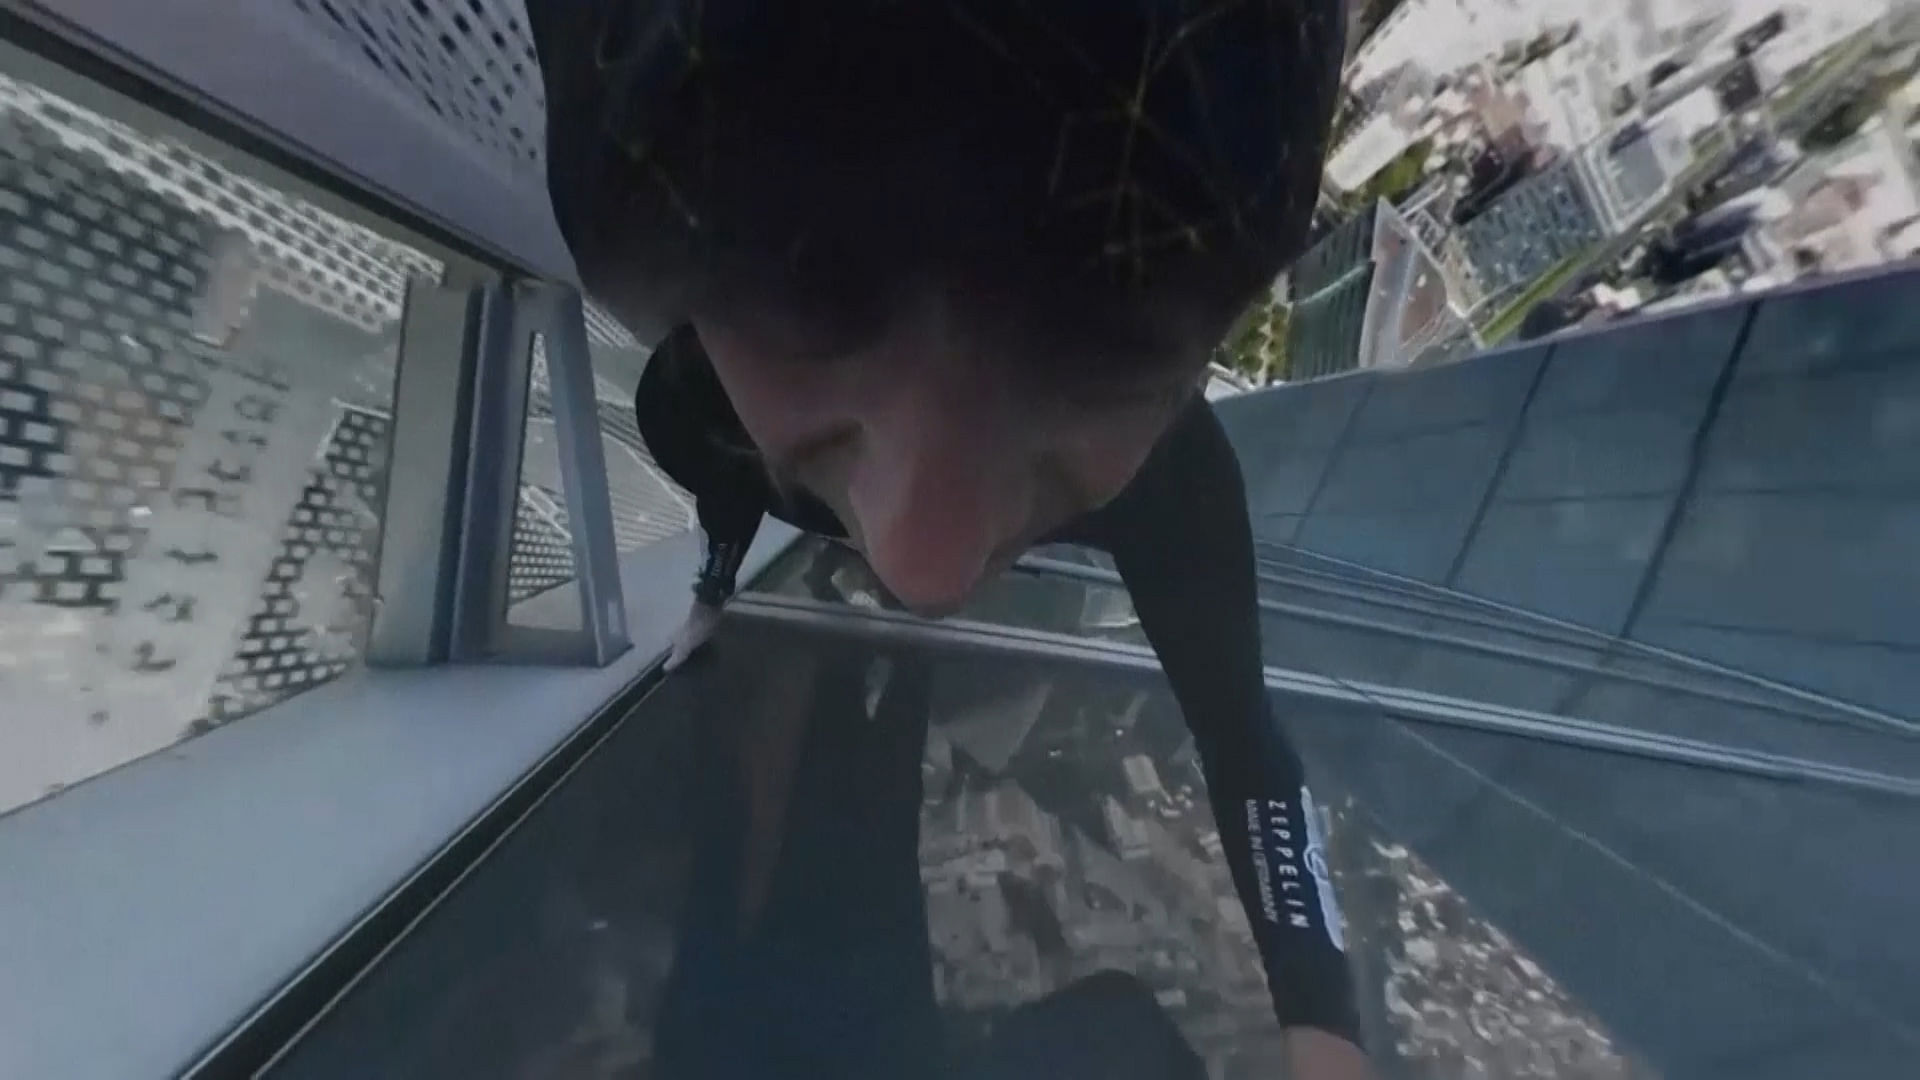 Alain Robert scaled an 185 metre (600 foot) high skyscraper in the business district of La Defense, outside Paris on Wednesday. (Photo: AP/ALAIN ROBERT HANDOUT screengrab)